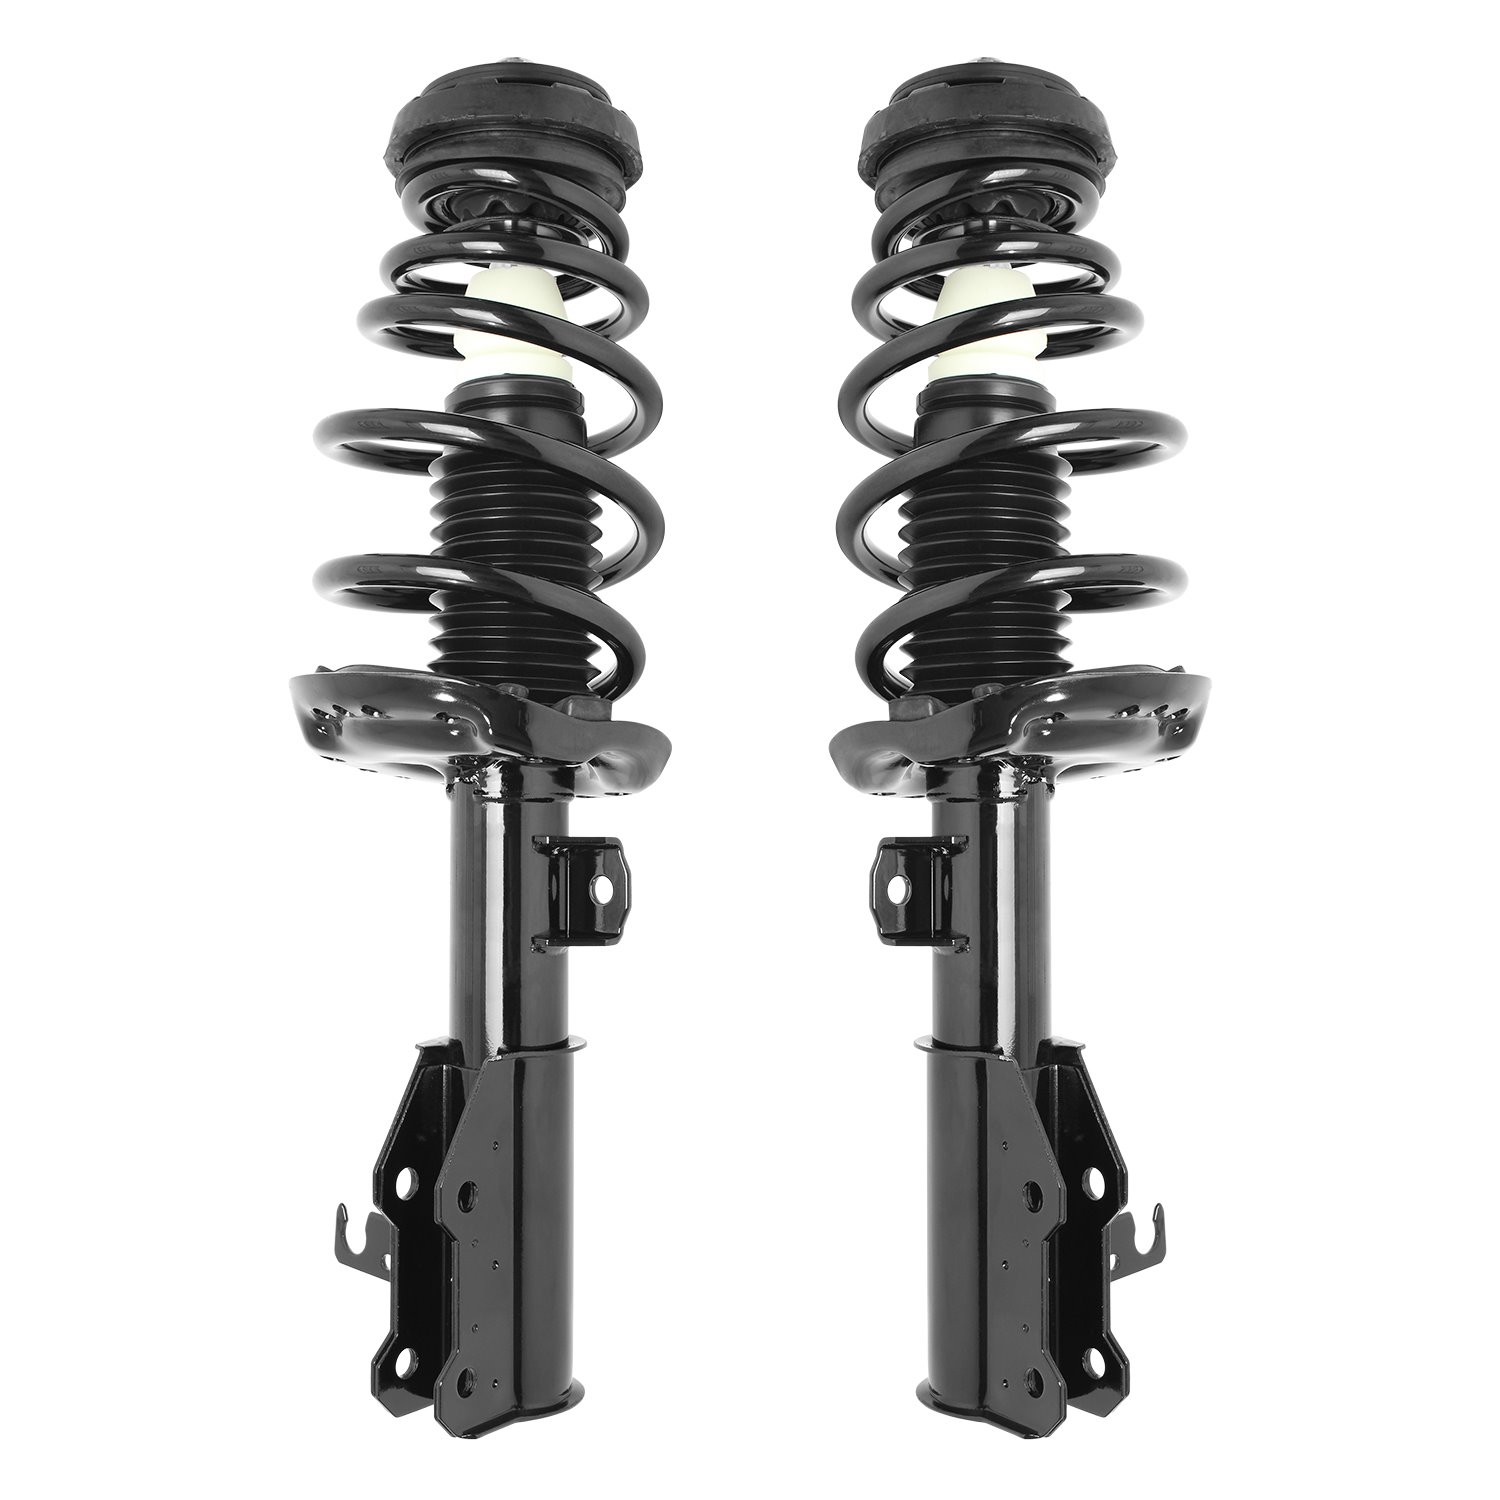 2-11031-11032-001 Suspension Strut & Coil Spring Assembly Set Fits Select Buick LaCrosse, Buick Allure